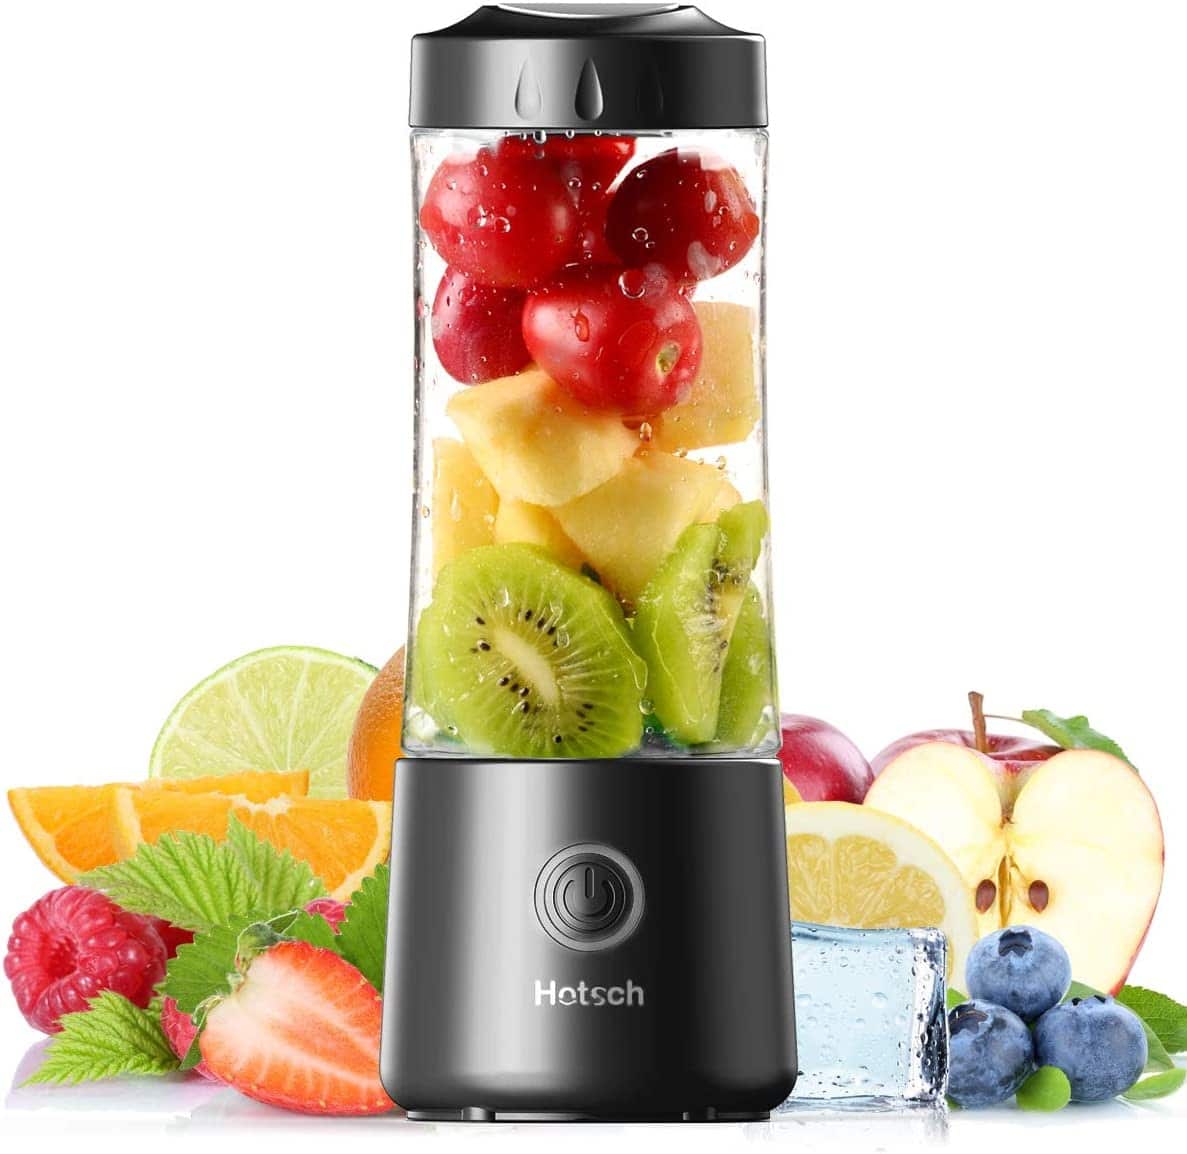 The 10 Best Small Blenders of 2021